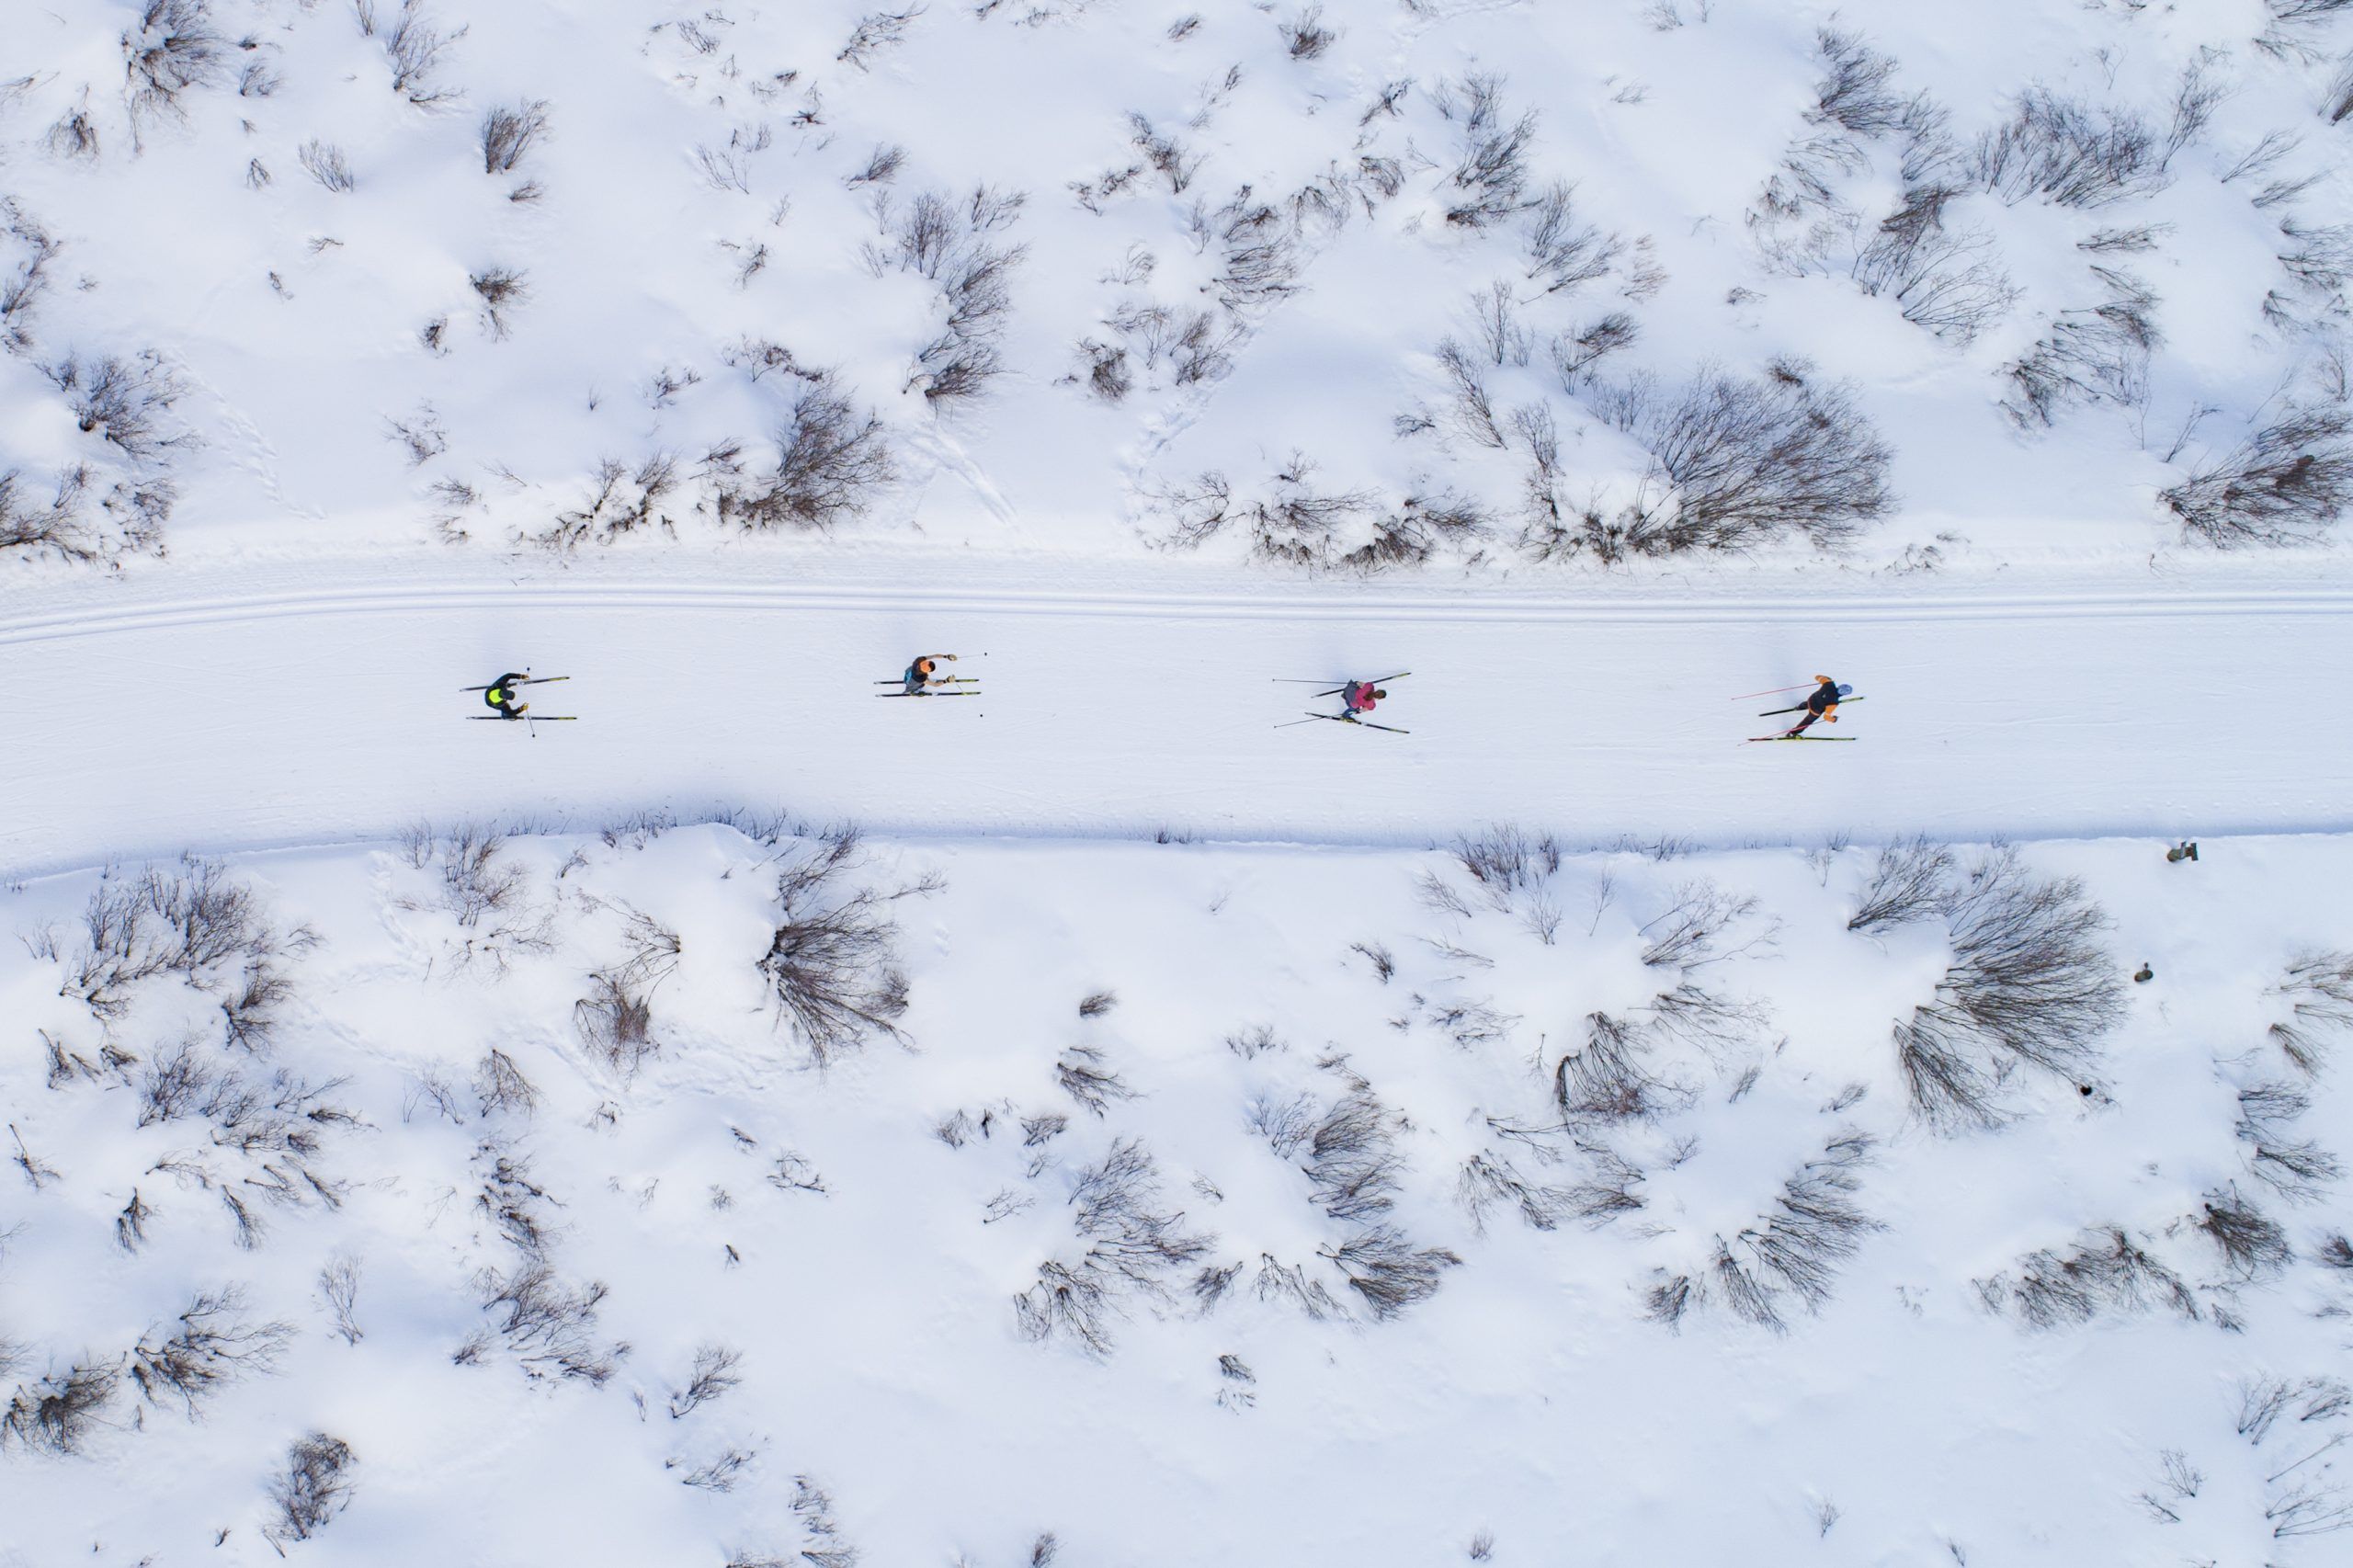 An aerial view of four skiers on a snowy track